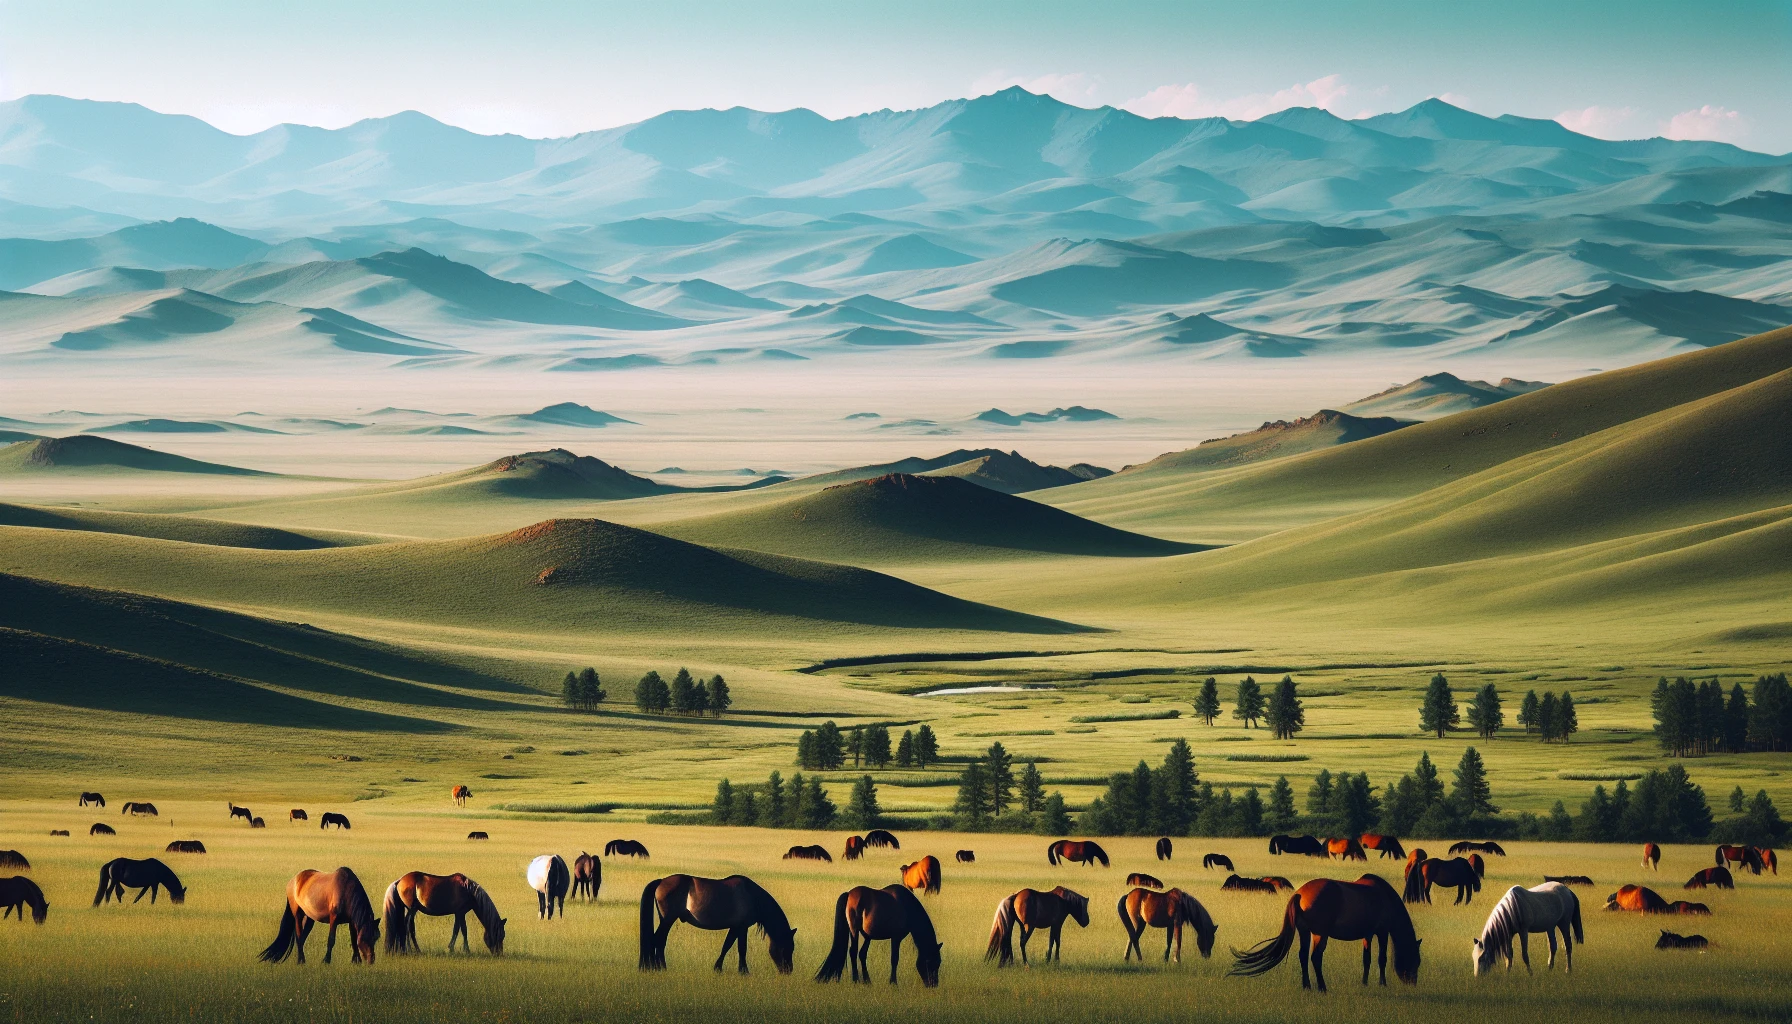 Vast Mongolian Steppe landscape with wild horses grazing